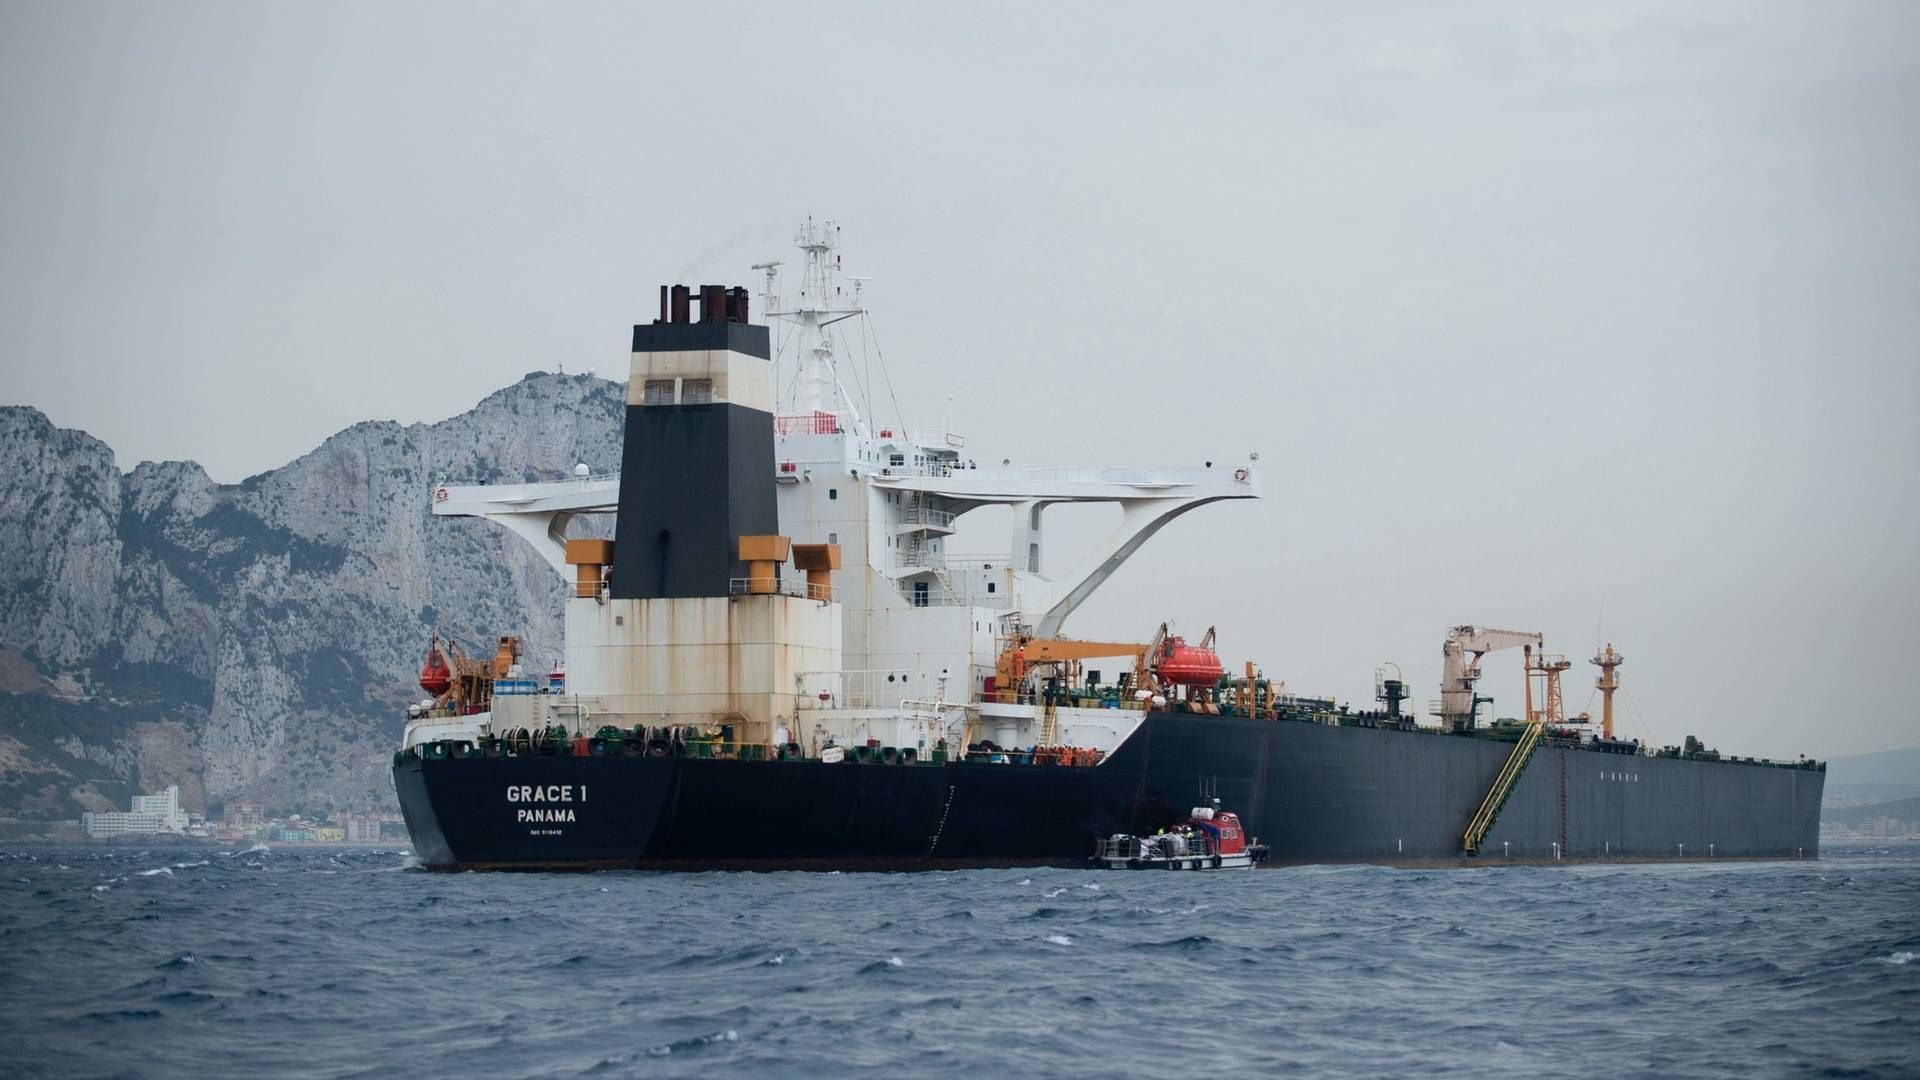 Vessel Grace 1, which has been in detainment off Gibraltar since Thursday. | Photo: JORGE GUERRERO/AFP / AFP